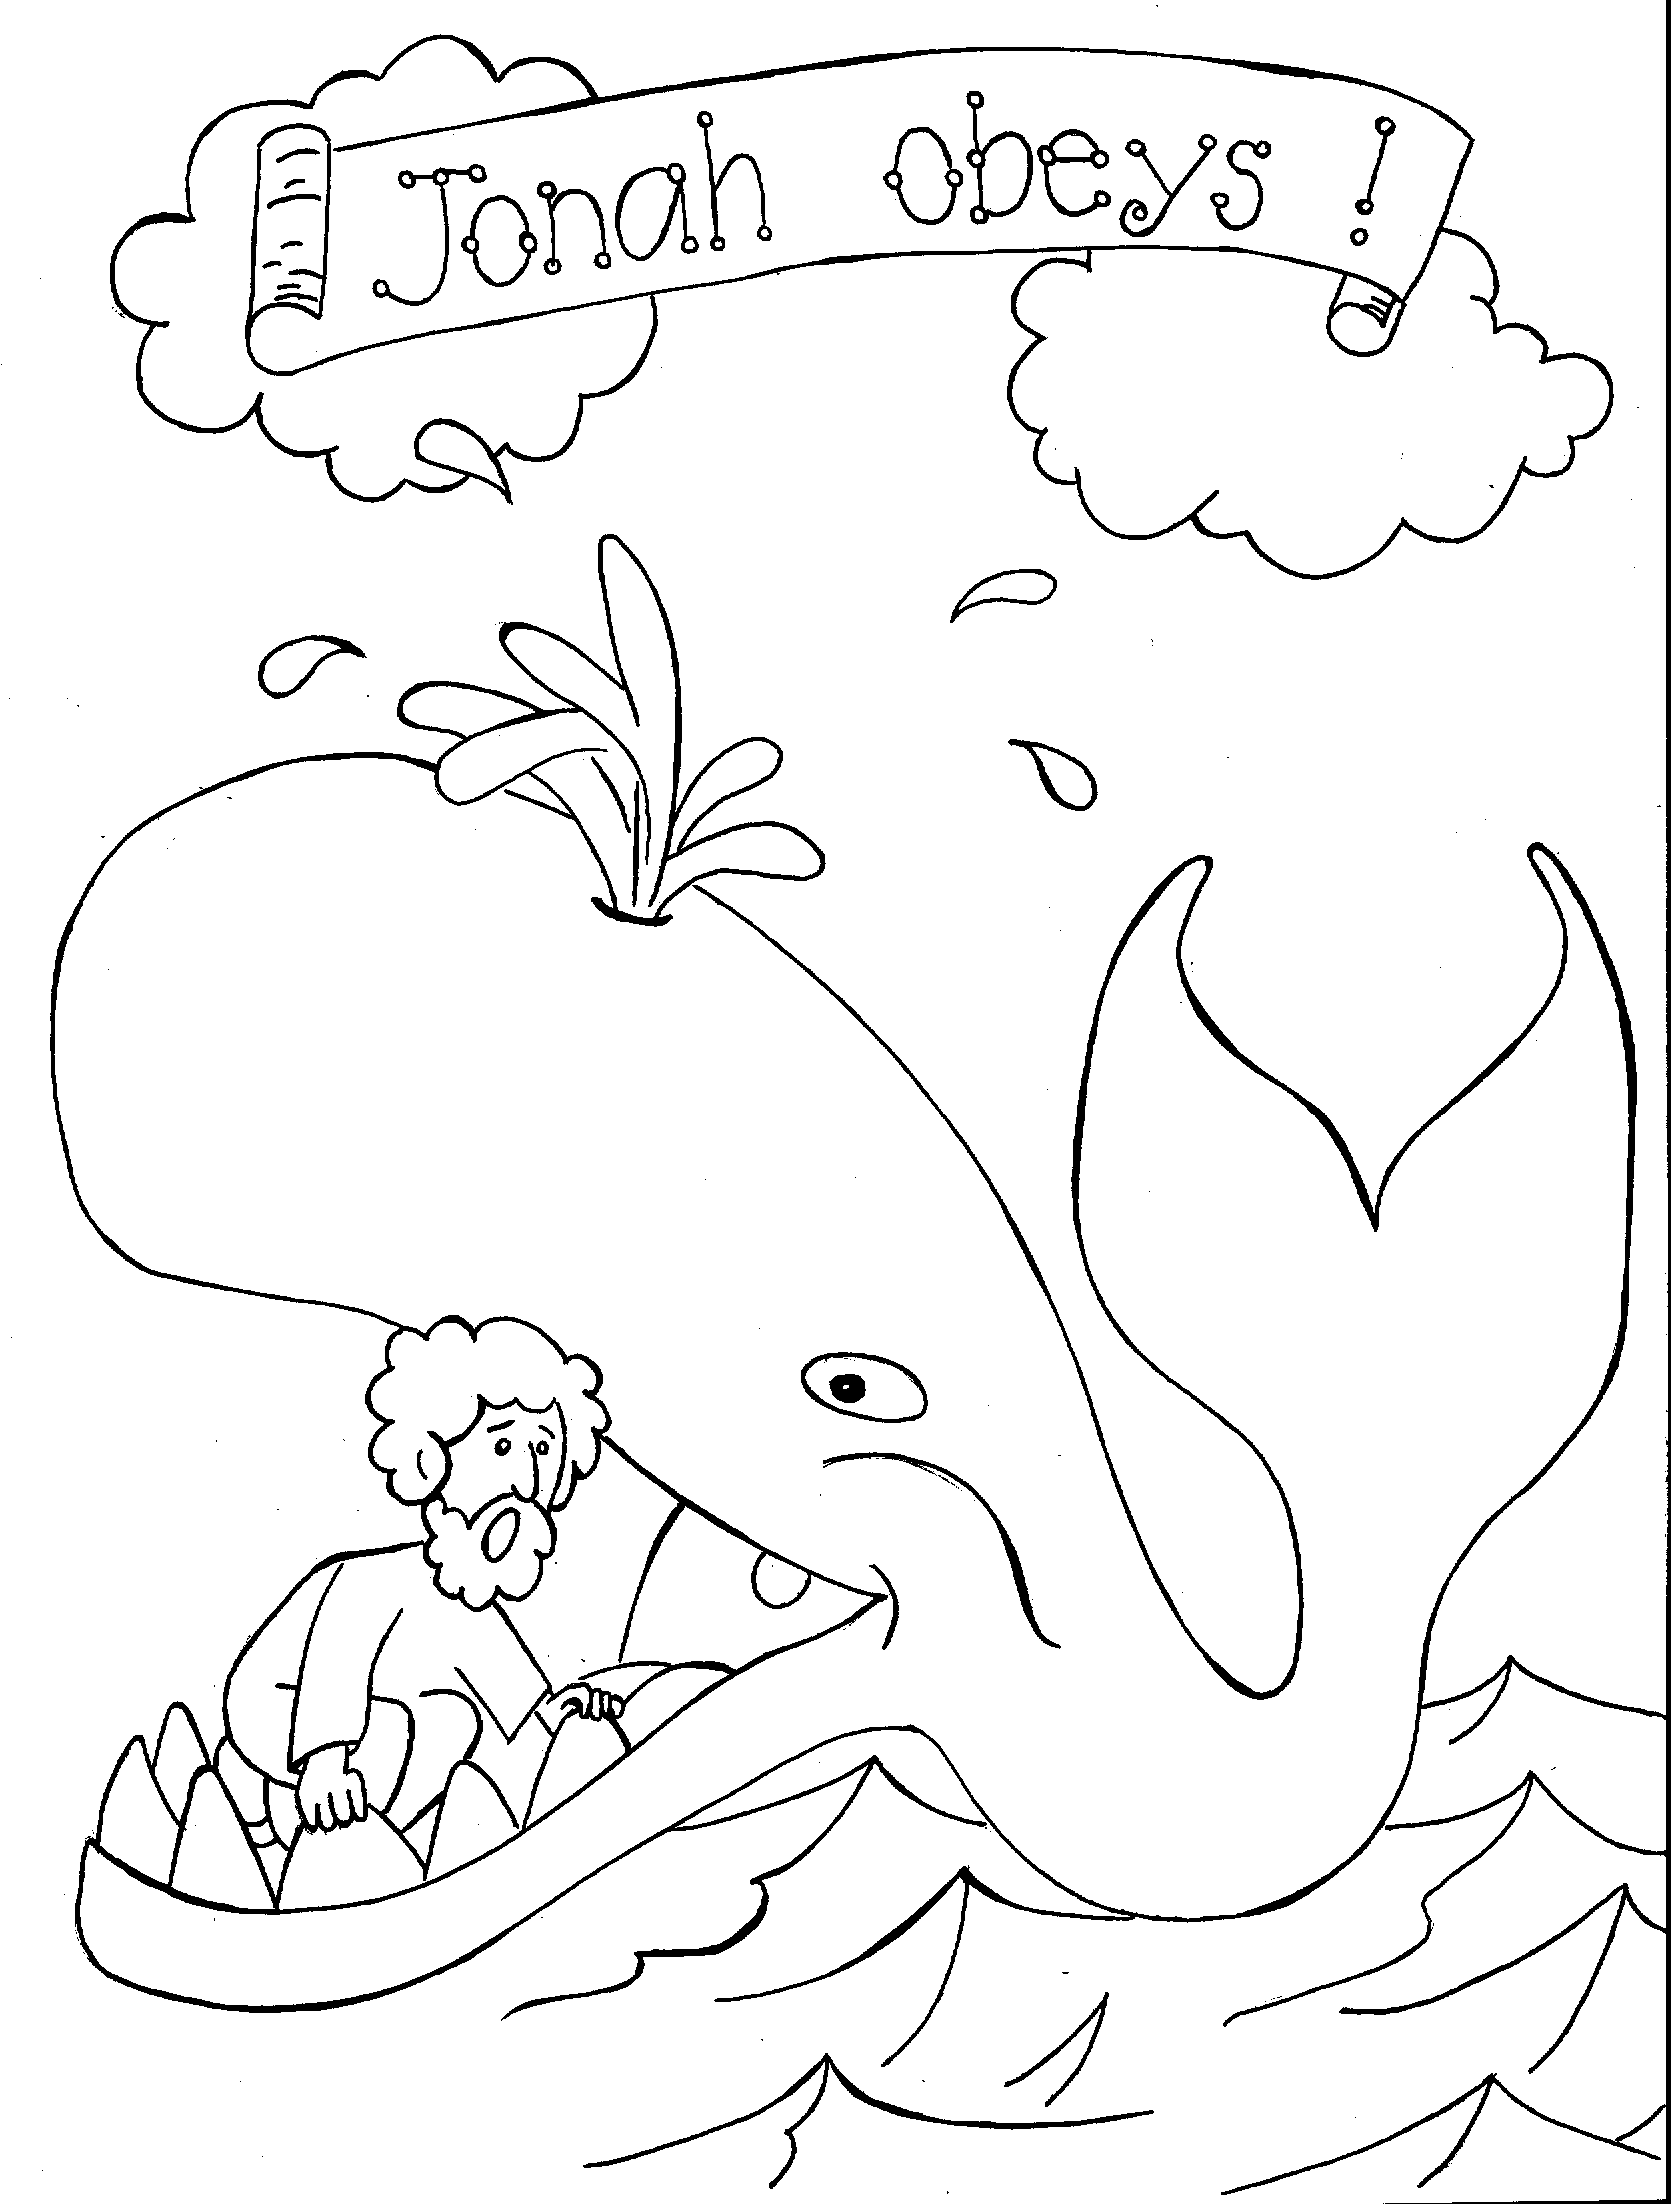 bible coloring pages for preschoolers bible coloring sheets for preschoolers preschool bible coloring bible preschoolers for pages 